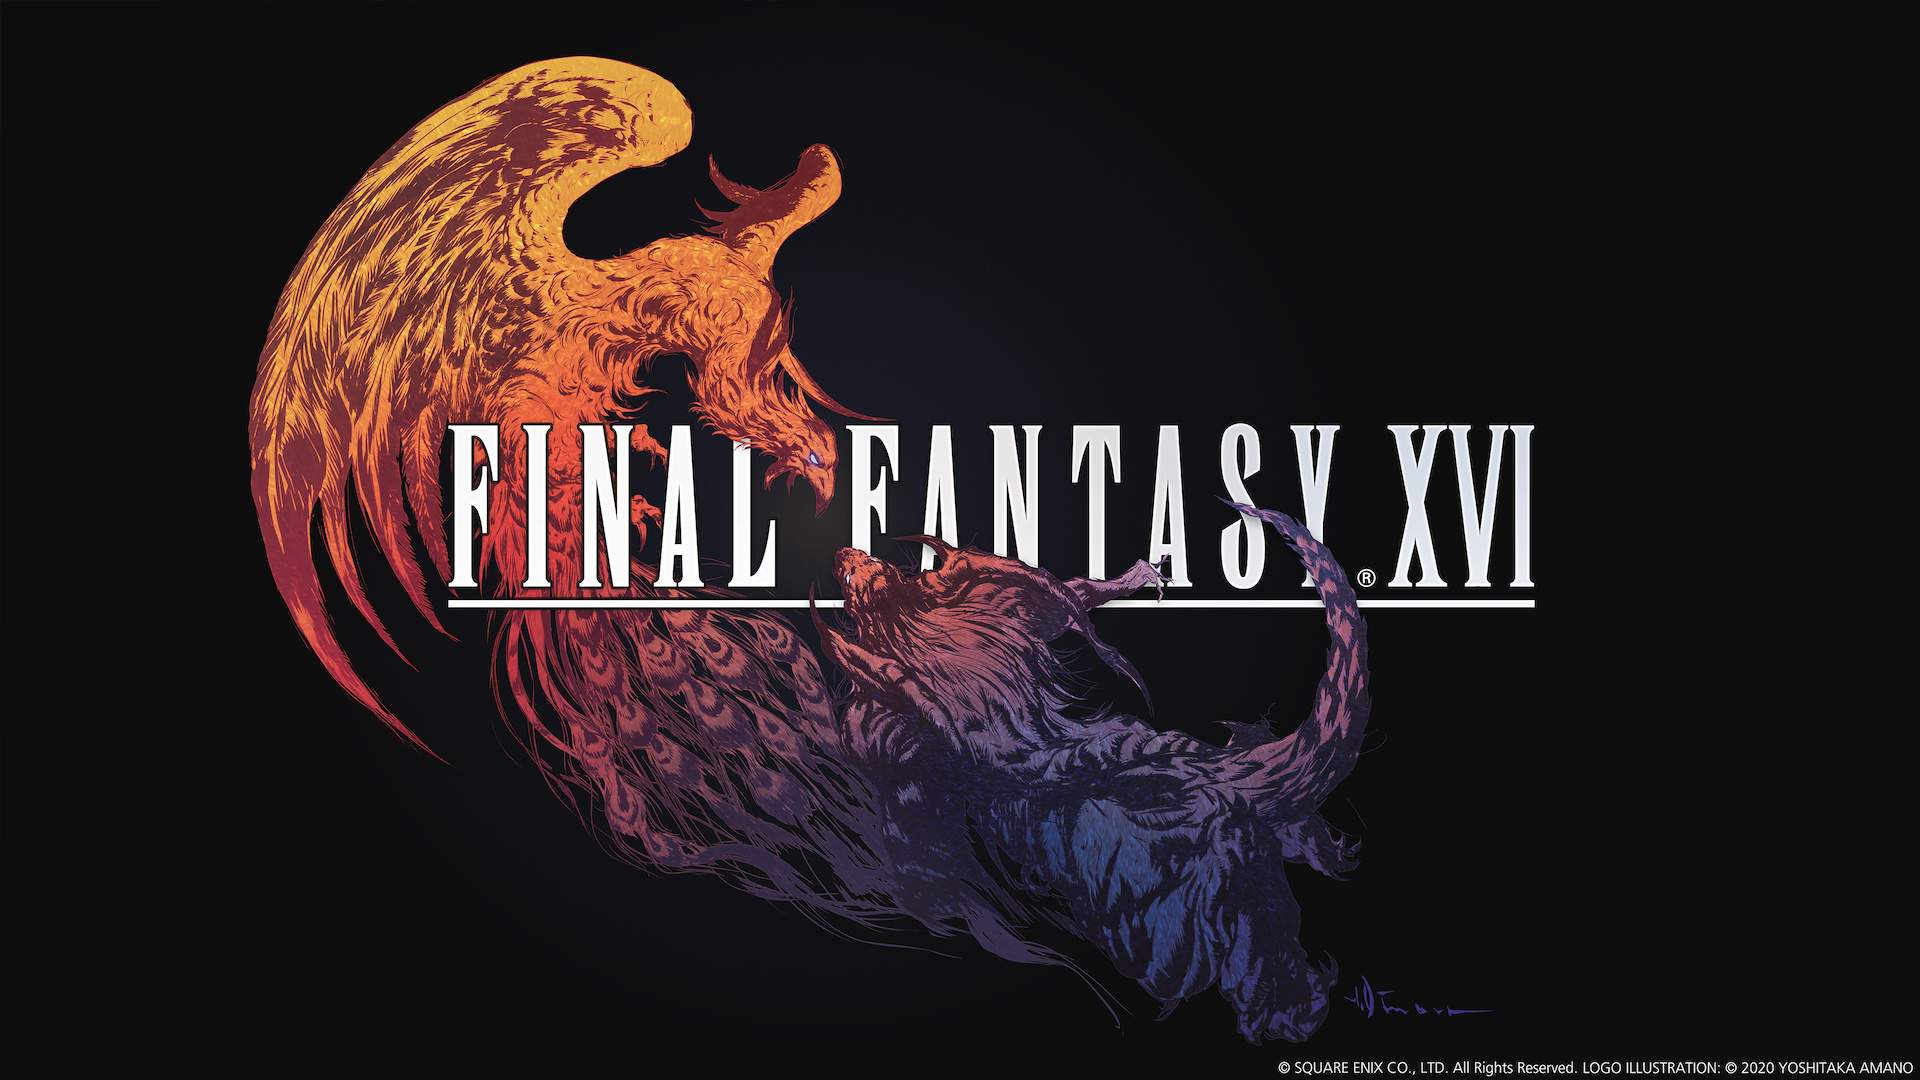 Preview: Final Fantasy XVI is a bold new direction for the series